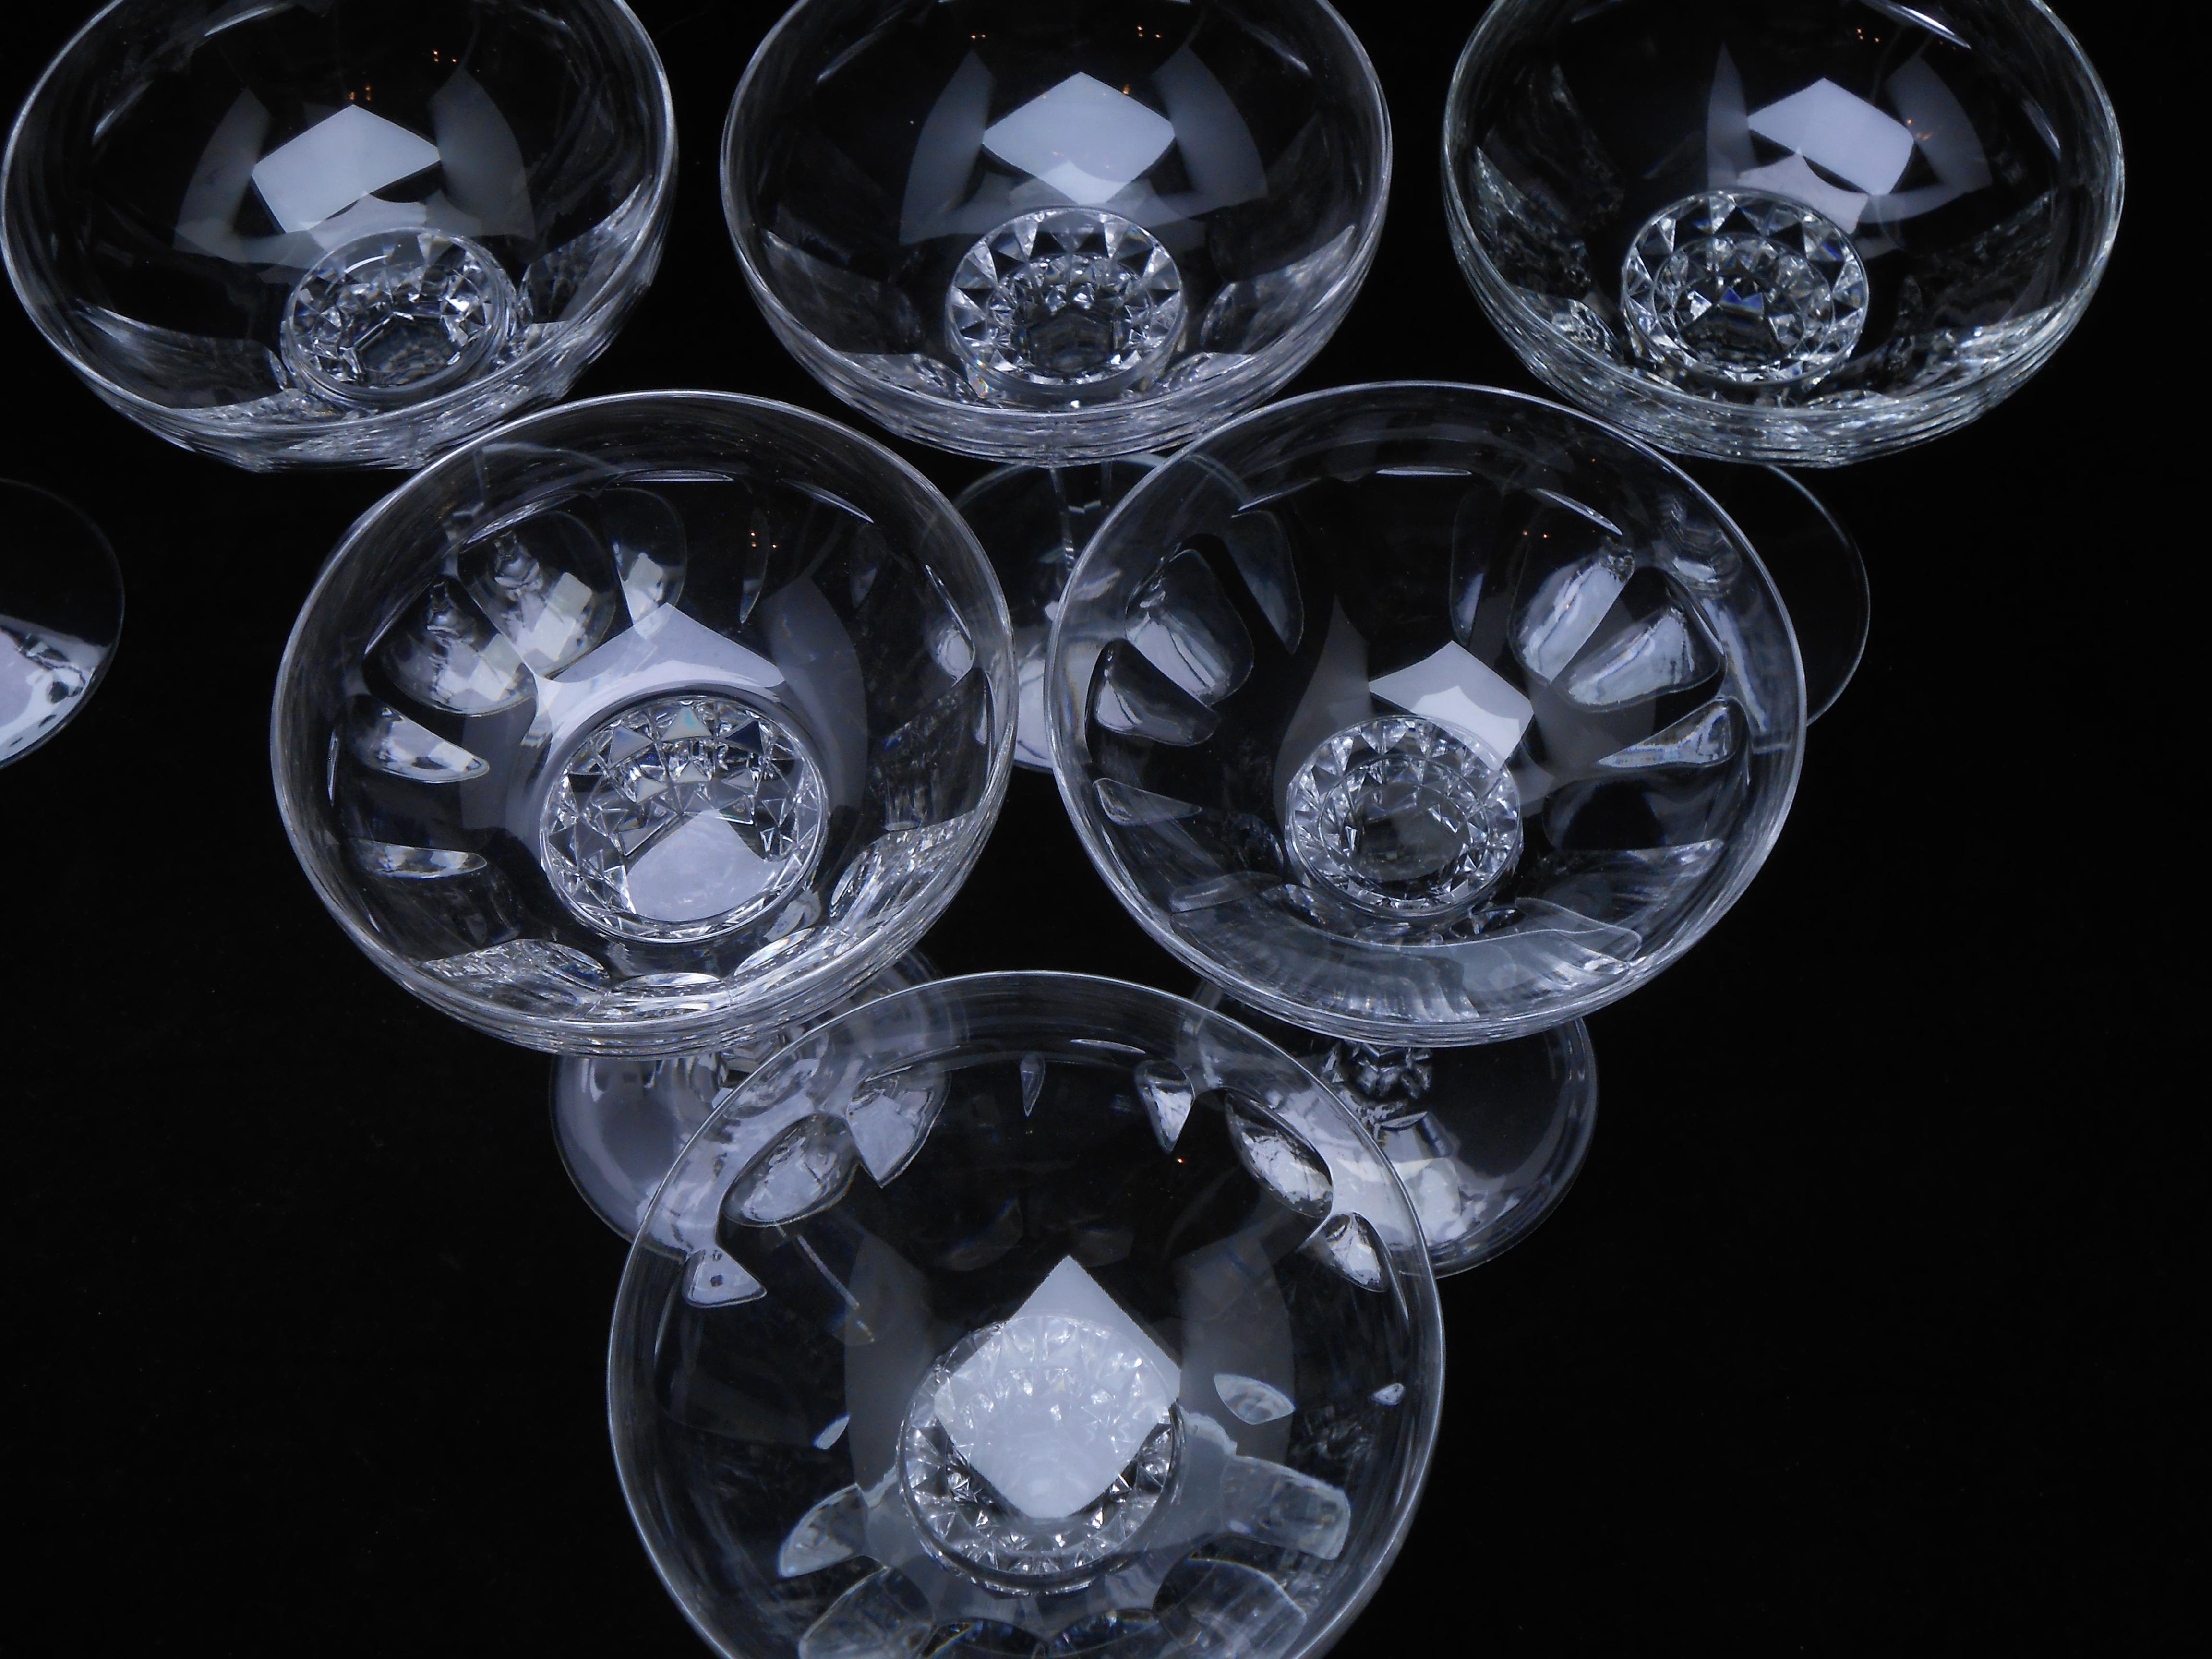 Hand-Crafted Crystal Champagne Coupes, Starlight by Jan Eisenloeffel 'Kristalunie, NL, 1928